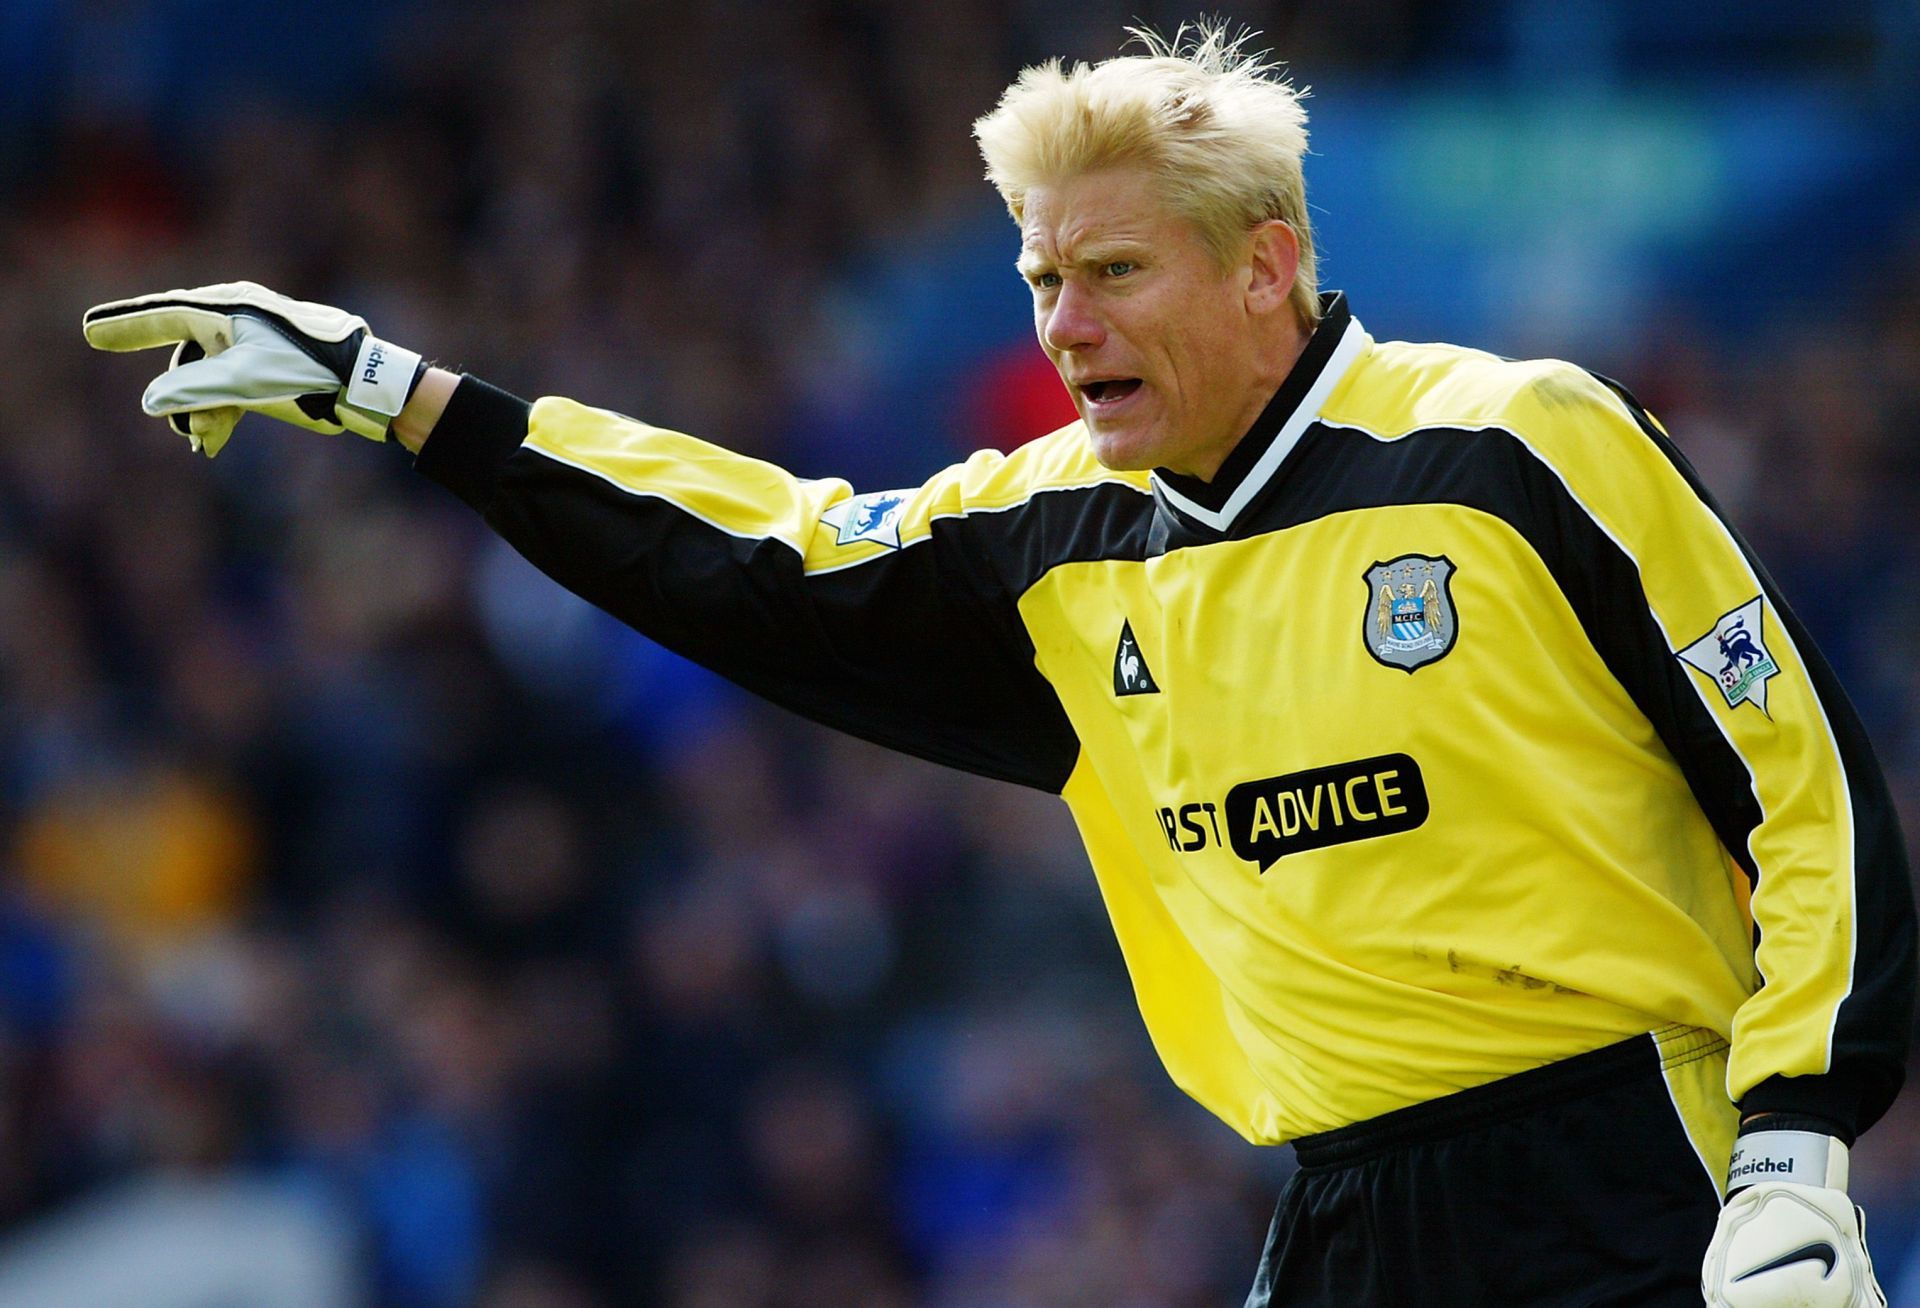 Peter Schmeichel ended his glorious career at Man City